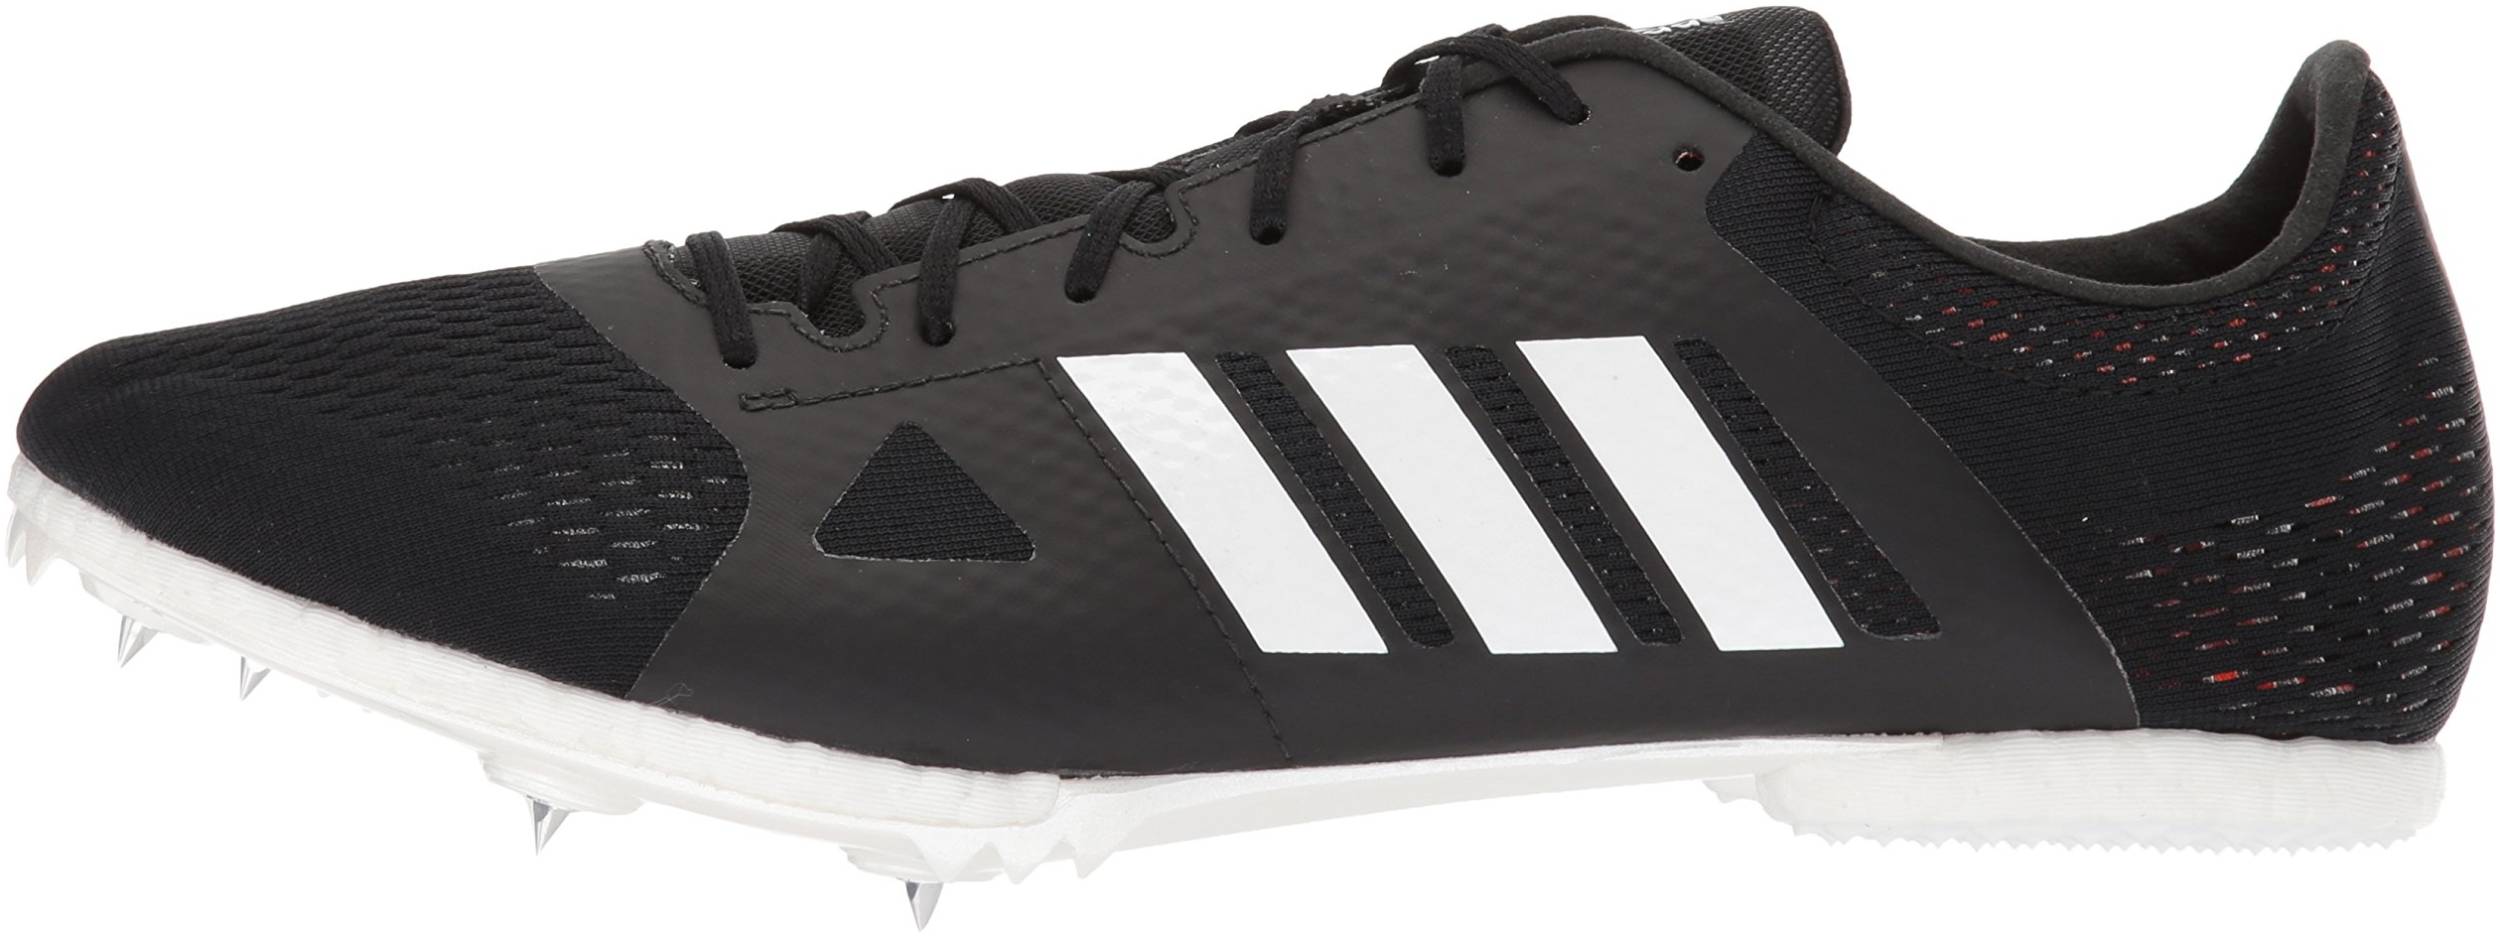 Only $27 + Review of Adidas Adizero MD 